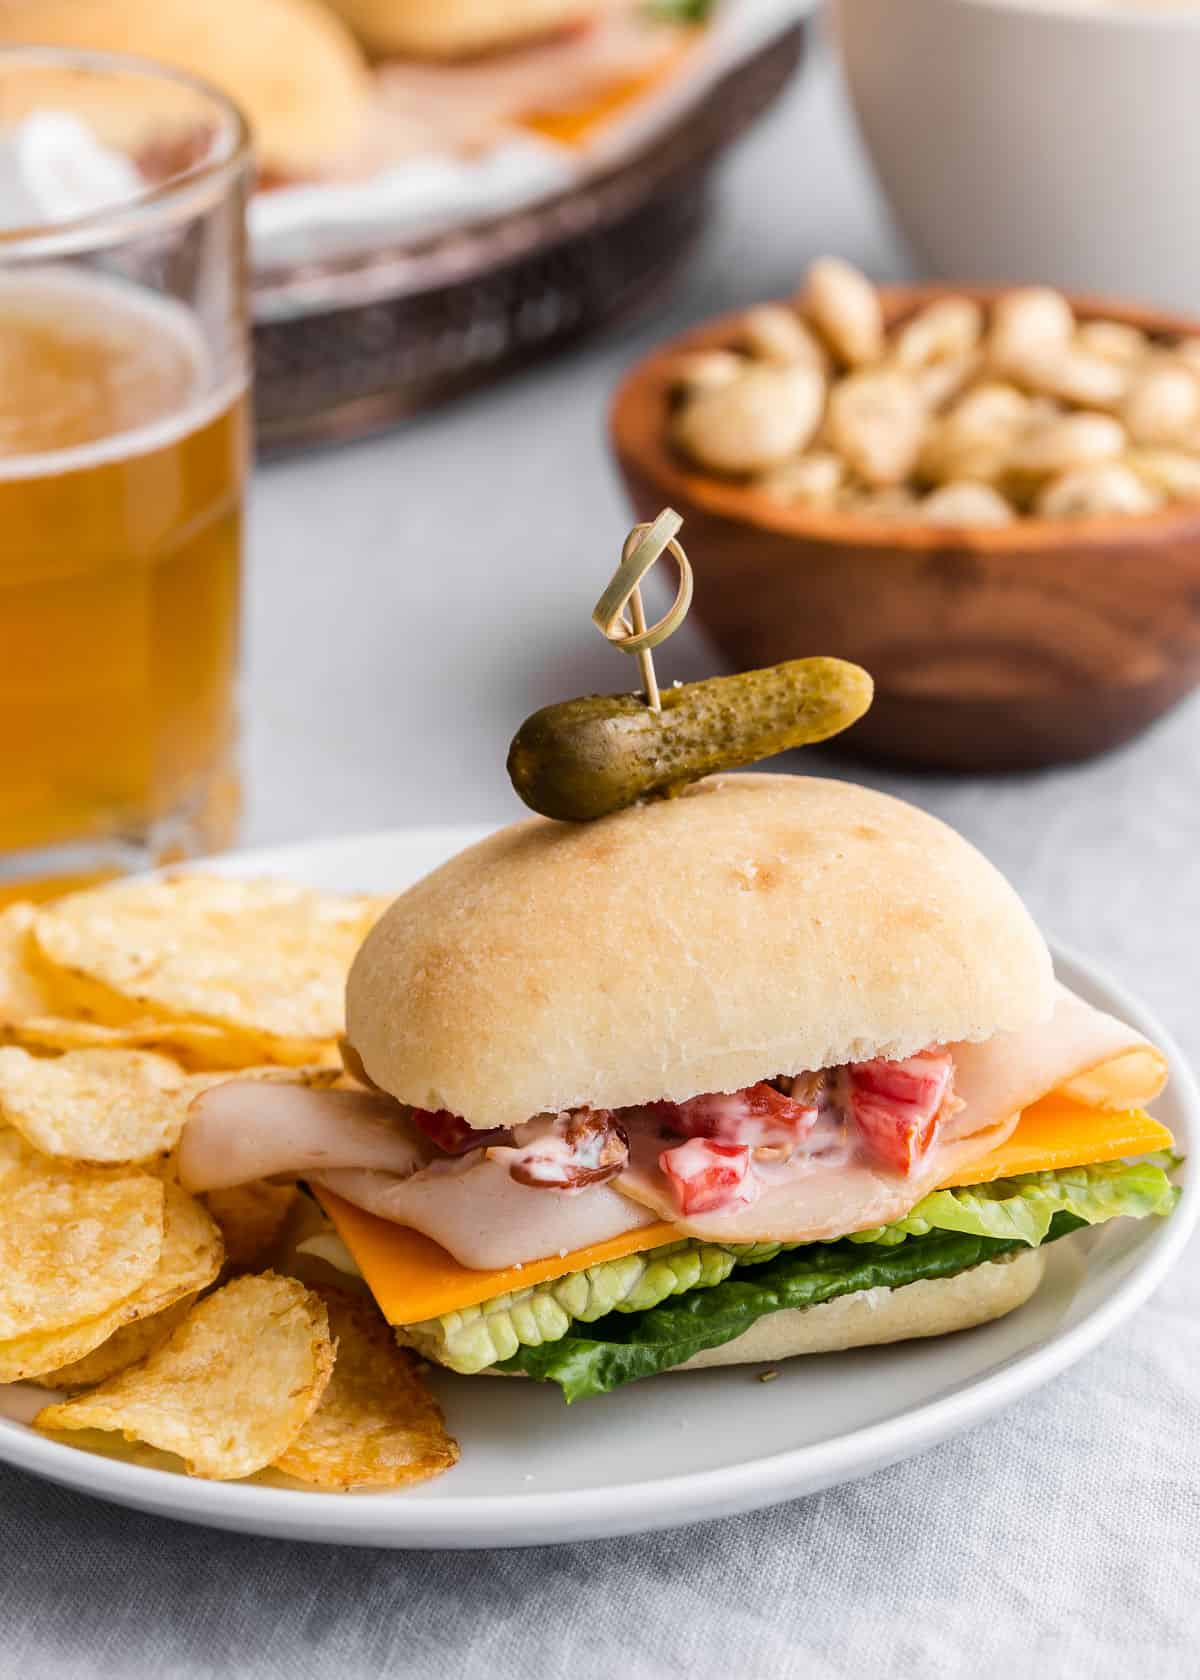 mini blt sandwich on plate with potato chips and beer.